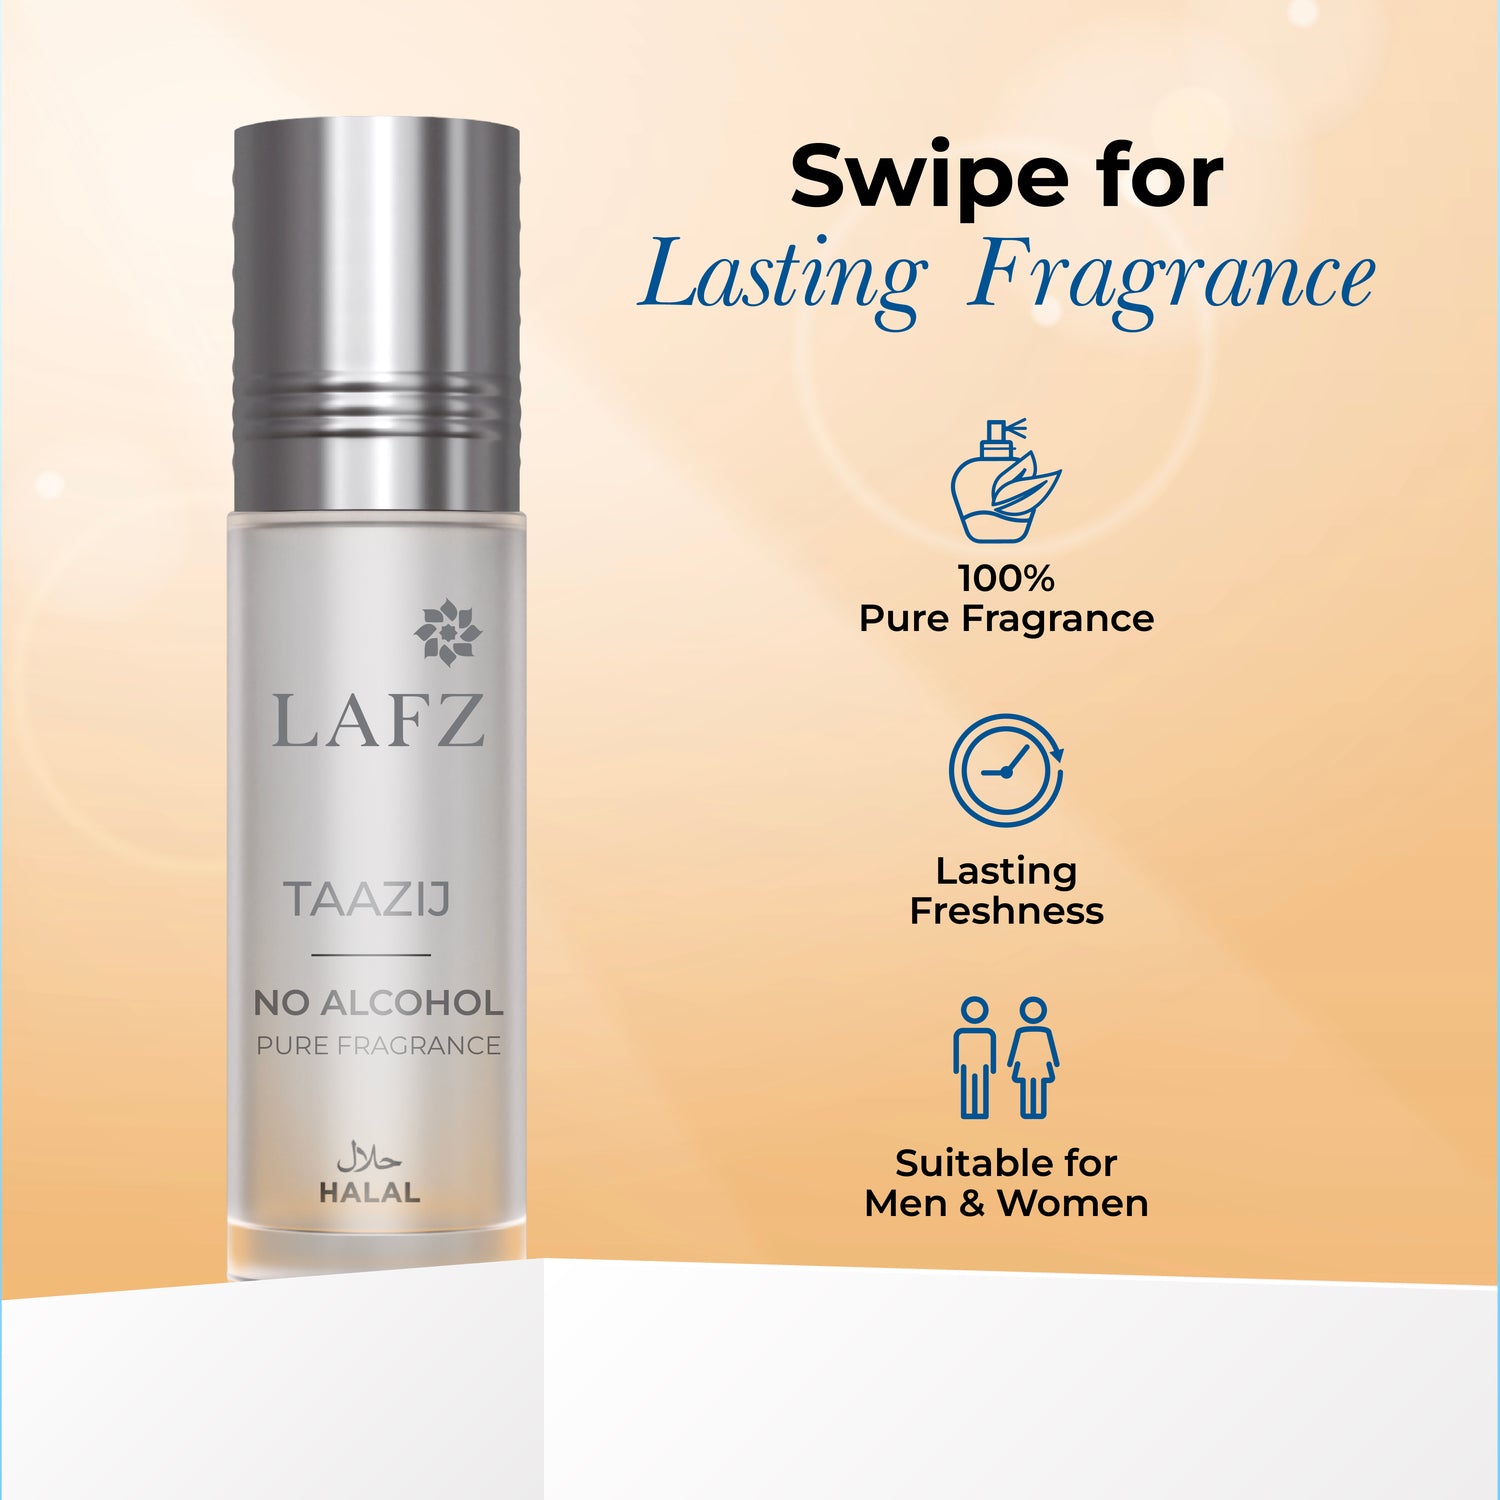 Lafz Pure Fragrance No Alcohol Perfume Roll On (8ml) - Taazij